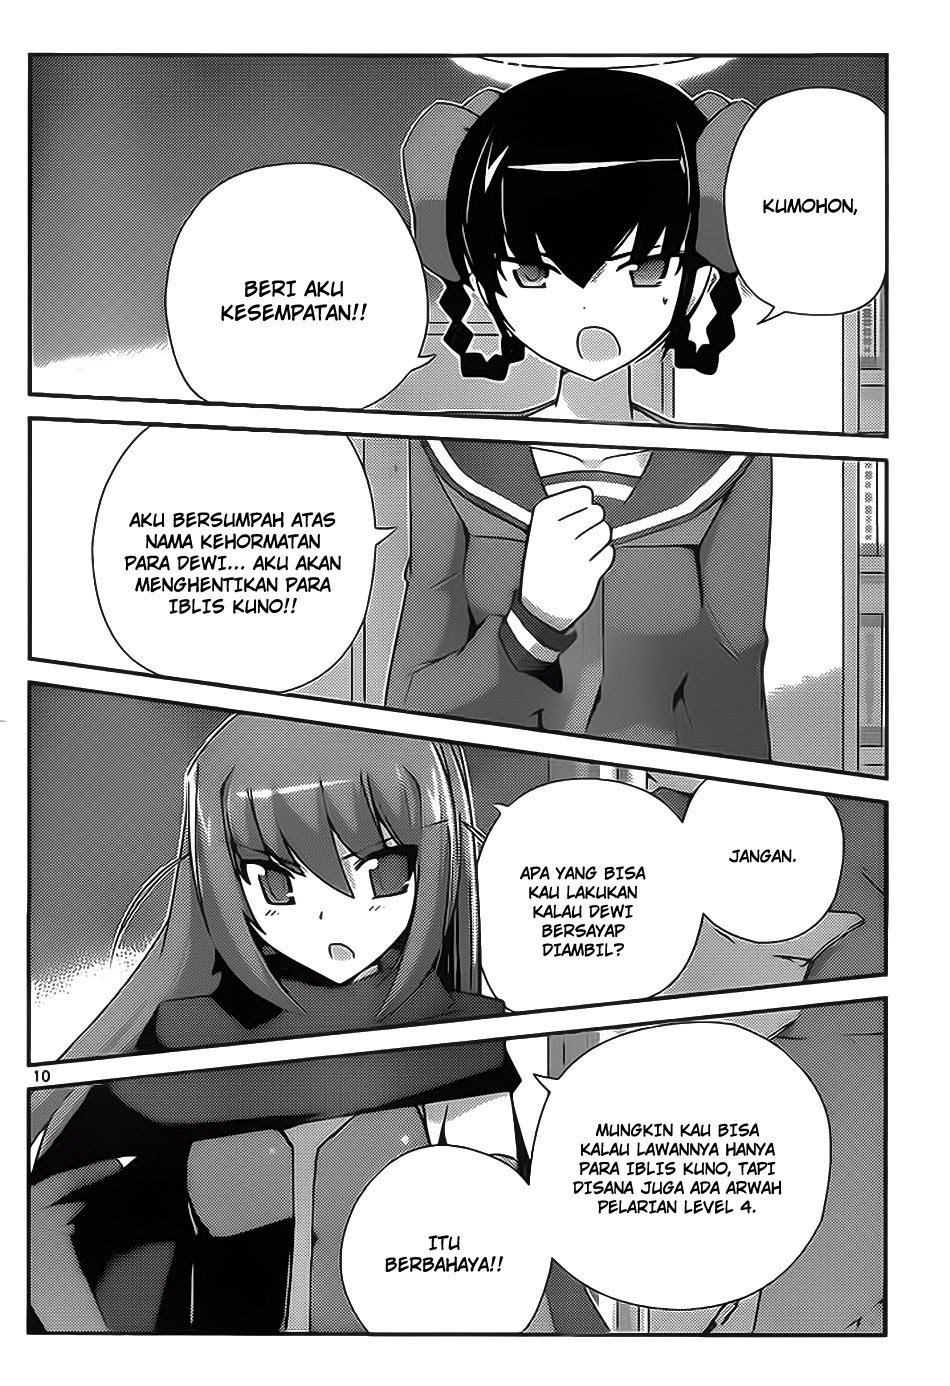 The World God Only Knows Chapter 178